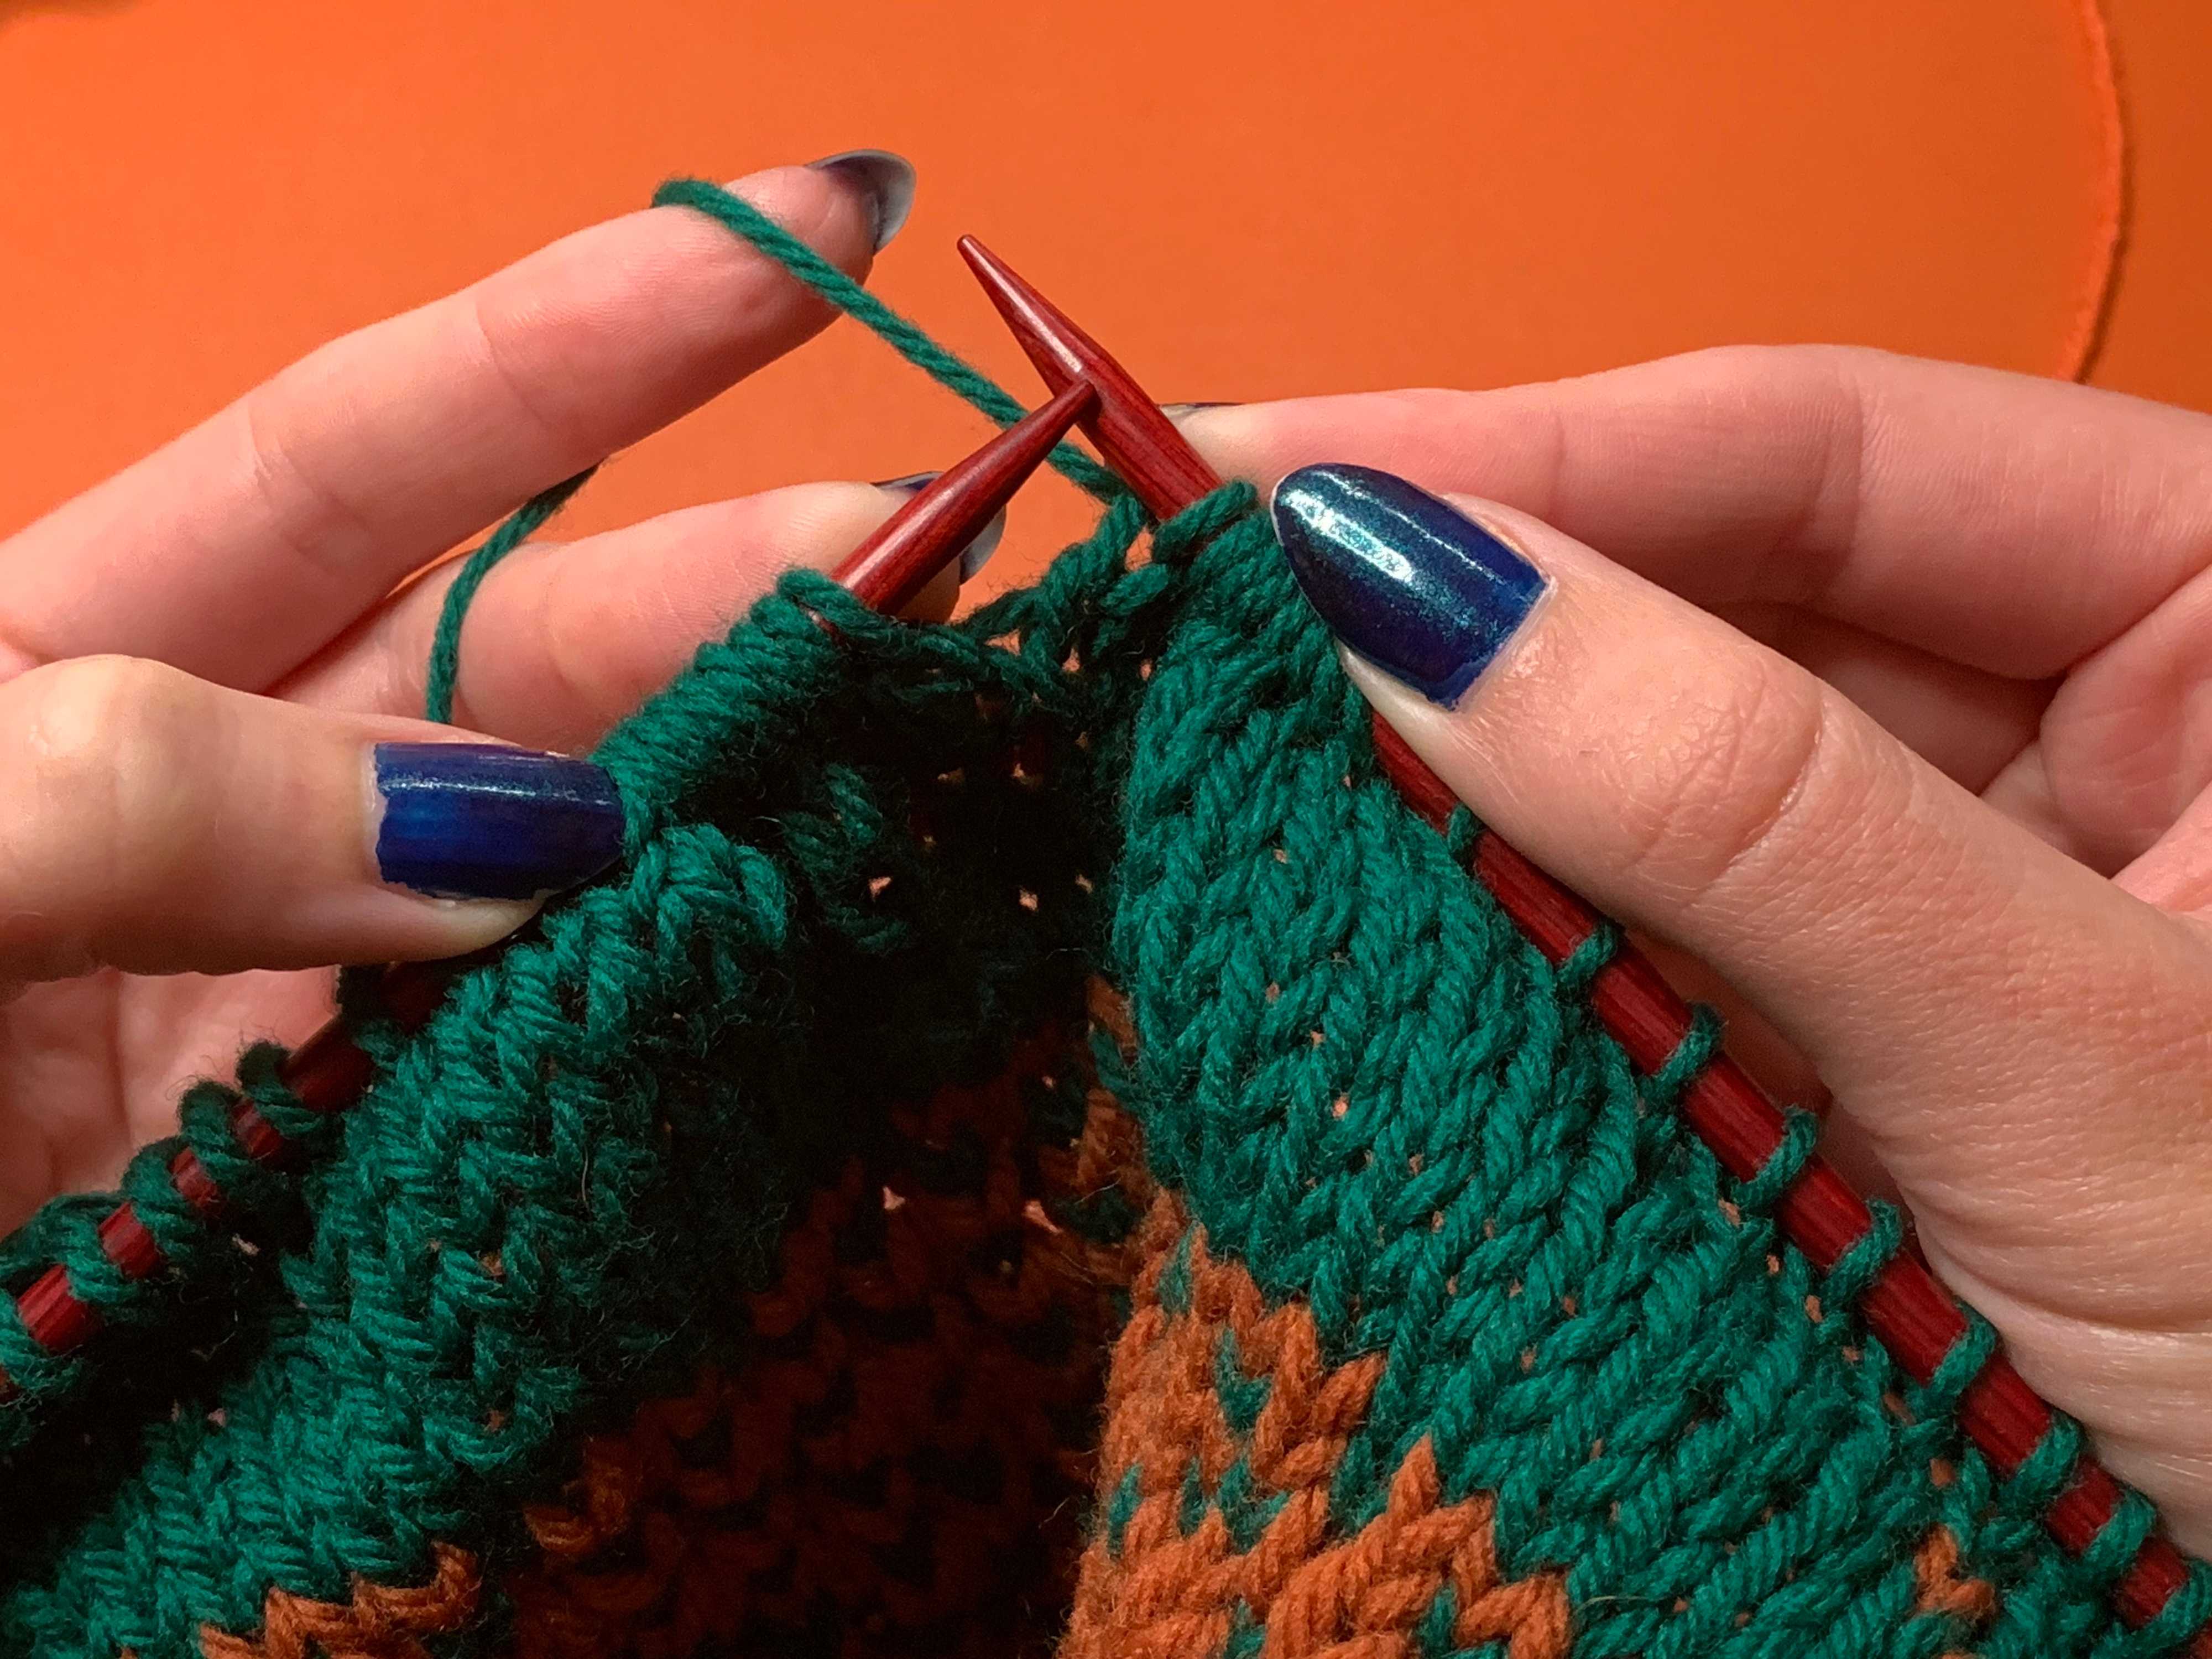 Hands holding a pair of knitting needles. You can see that the stitches are being held very close together on the tips of the needles, but much more spread out the further they get away.